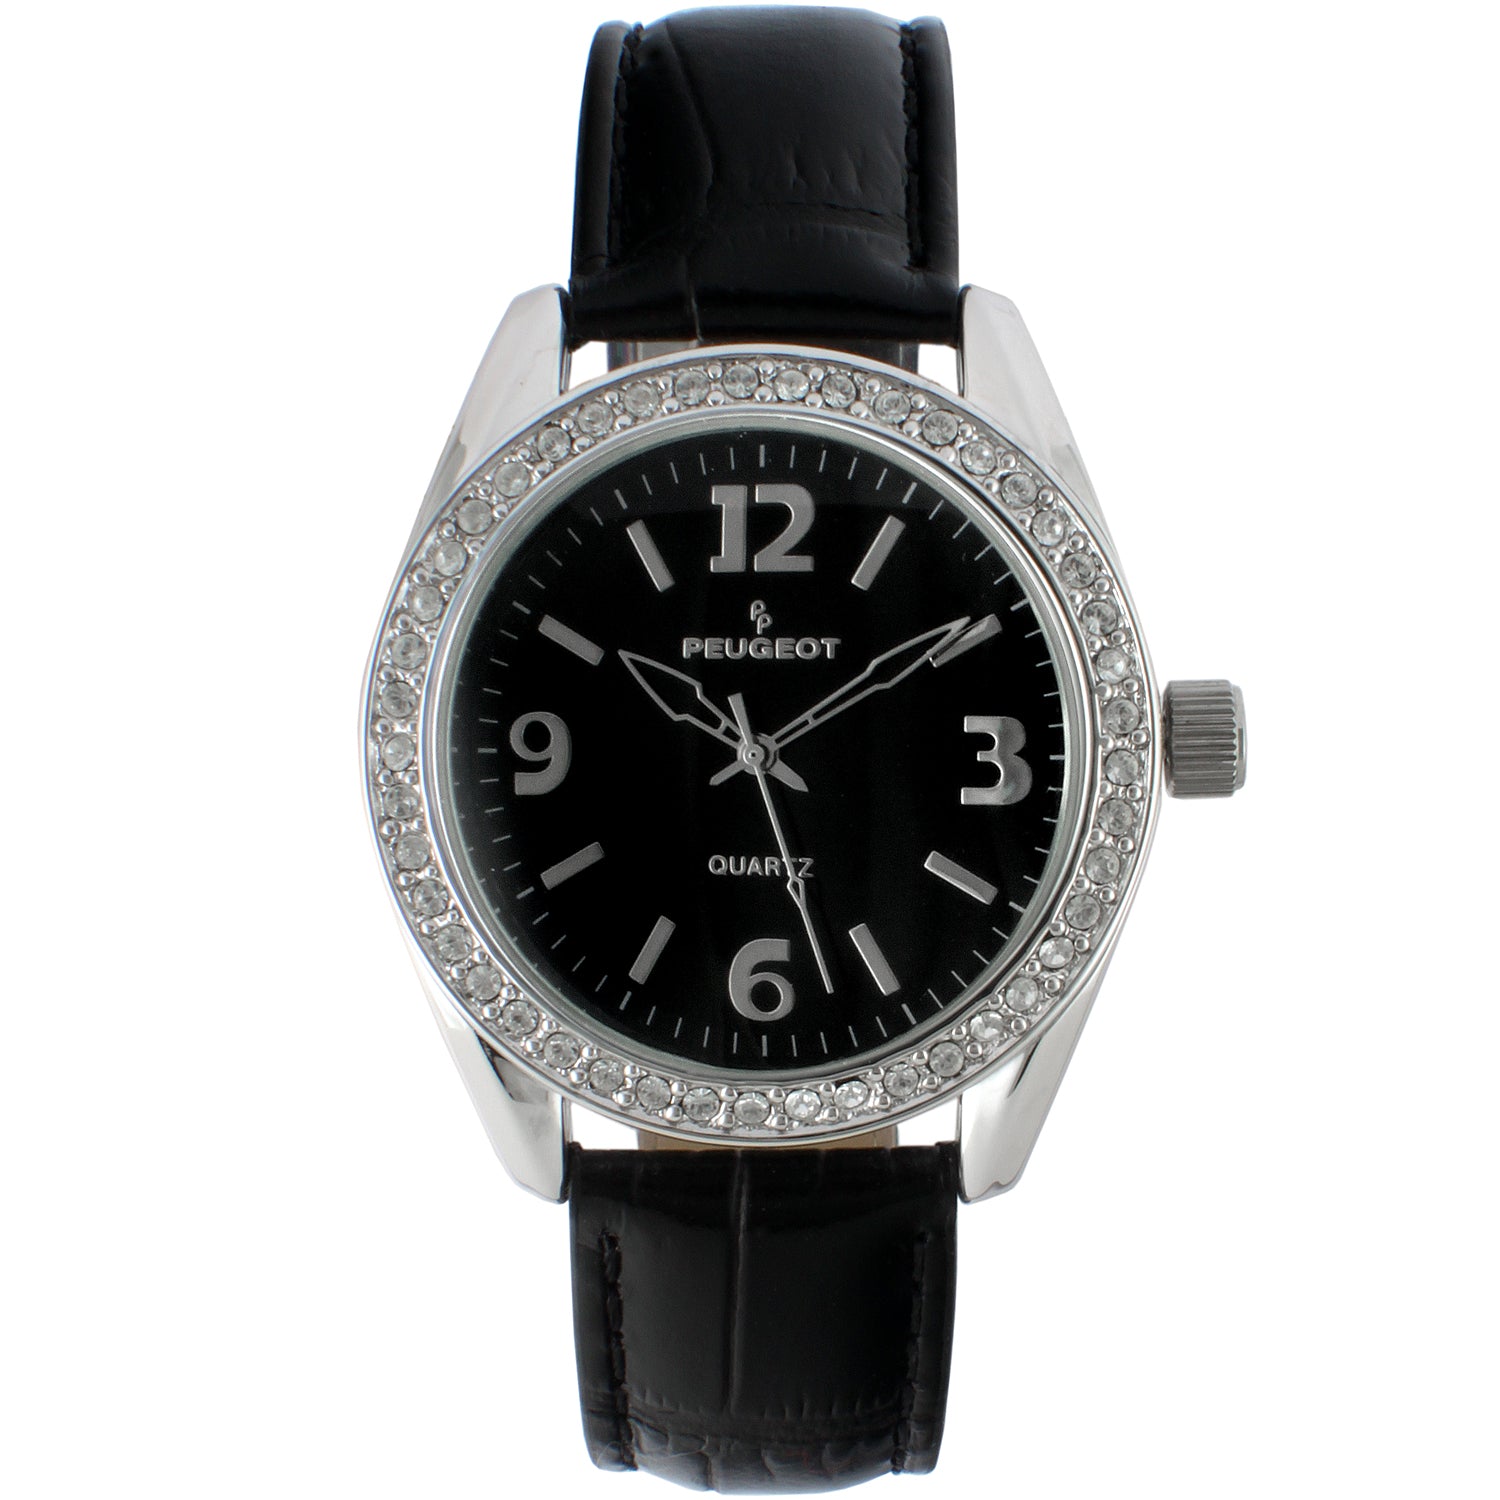 Woman Watches- 40mm Bold Crystal Bezel Leather Strap by Peugeot